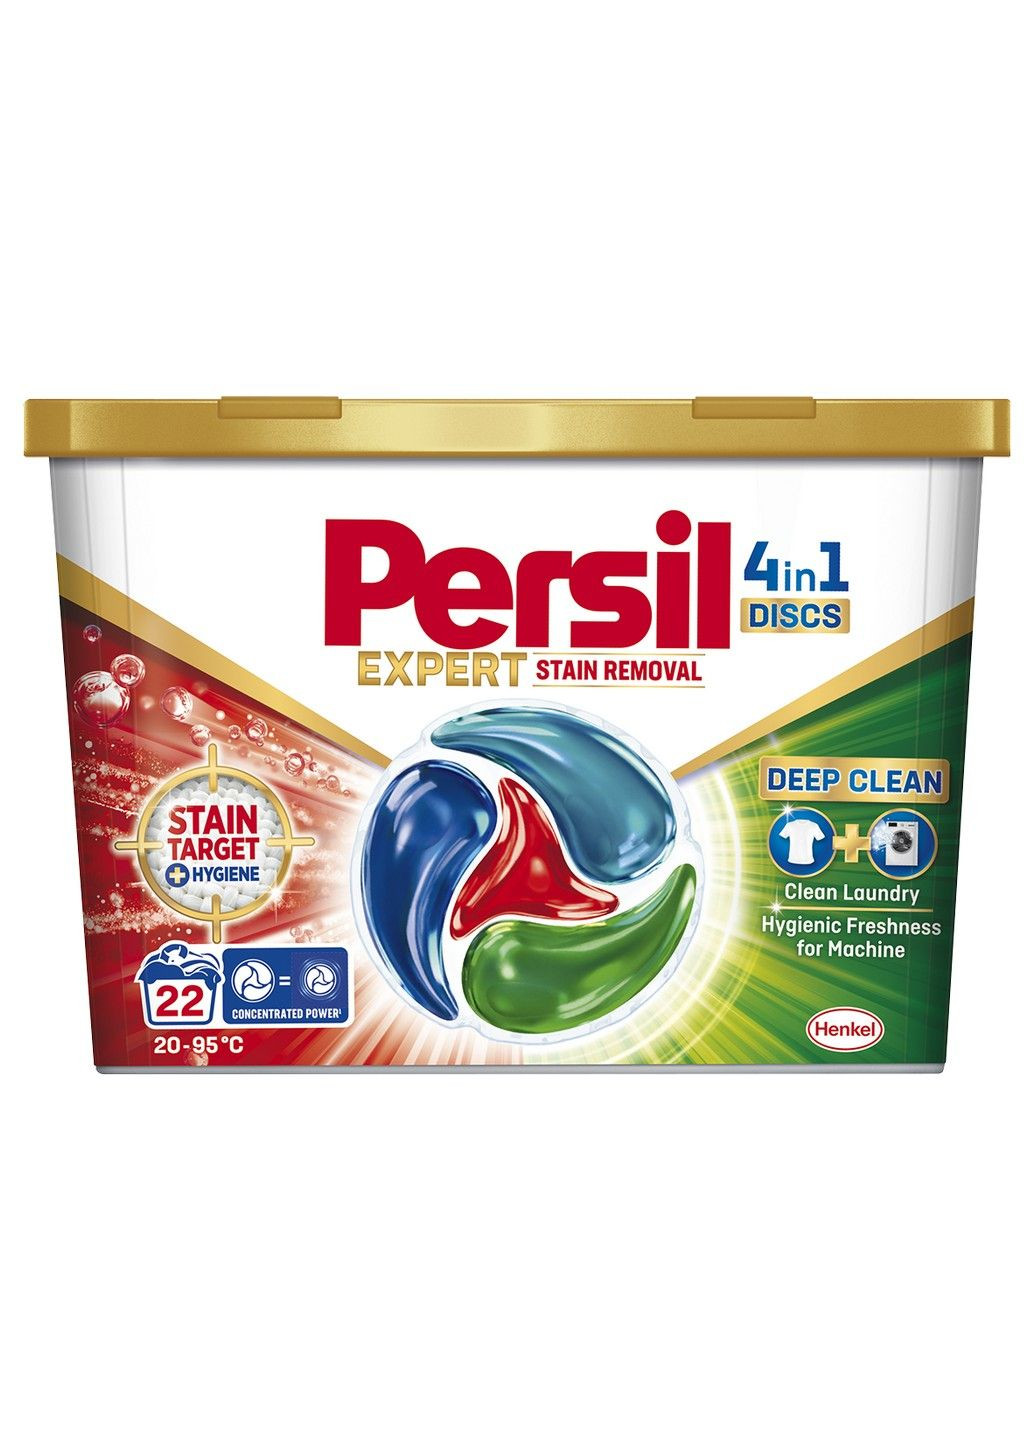 Диски для стирки 4in1 Discs Expert Stain Removal Deep Clean 22 шт Persil (293343737)